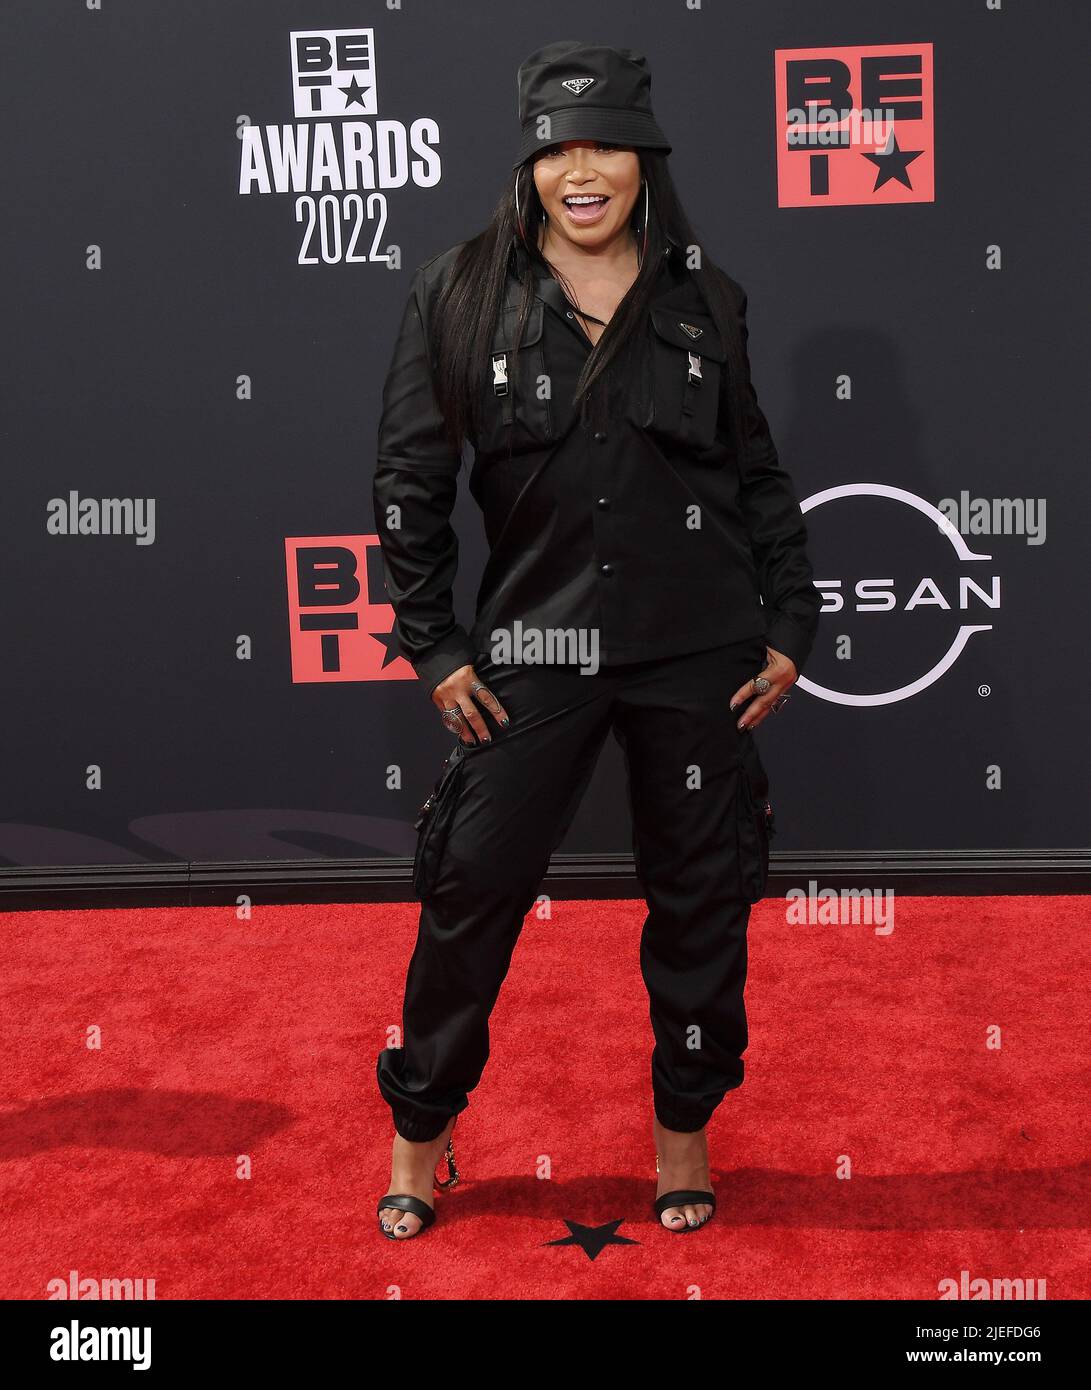 Los Angeles, USA. 26th June, 2022. Tisha Campbell arrives at the BET Awards 2022 held at the Microsoft Theater in Los Angeles, CA on Sunday, ?June 26, 2022. (Photo By Sthanlee B. Mirador/Sipa USA) Credit: Sipa USA/Alamy Live News Stock Photo